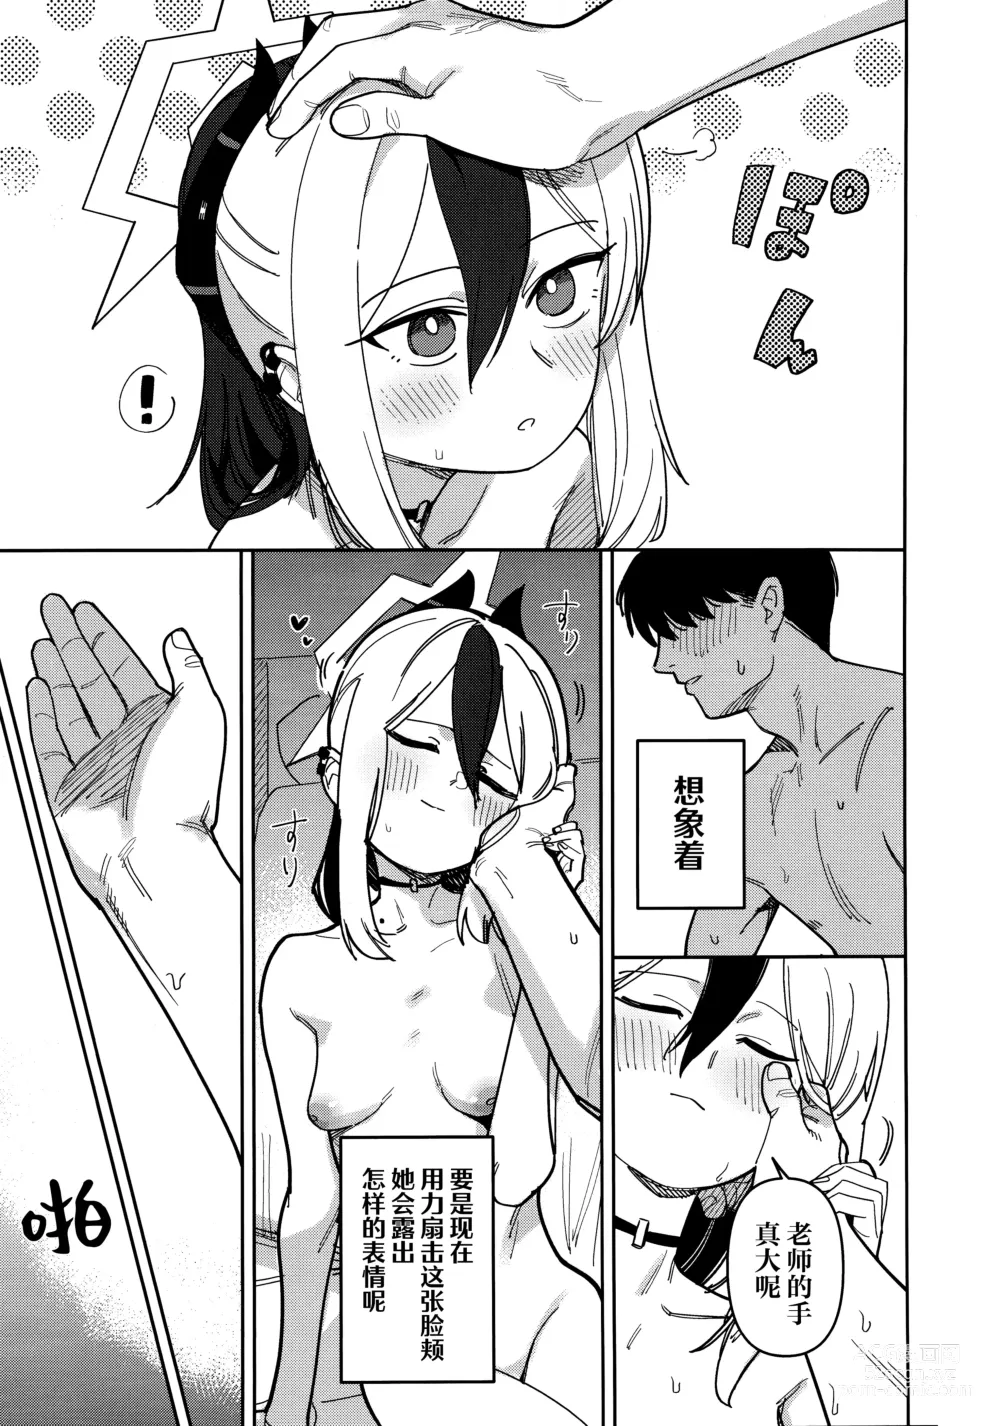 Page 15 of doujinshi 鬼方佳代子不会做这种事情 Part.2